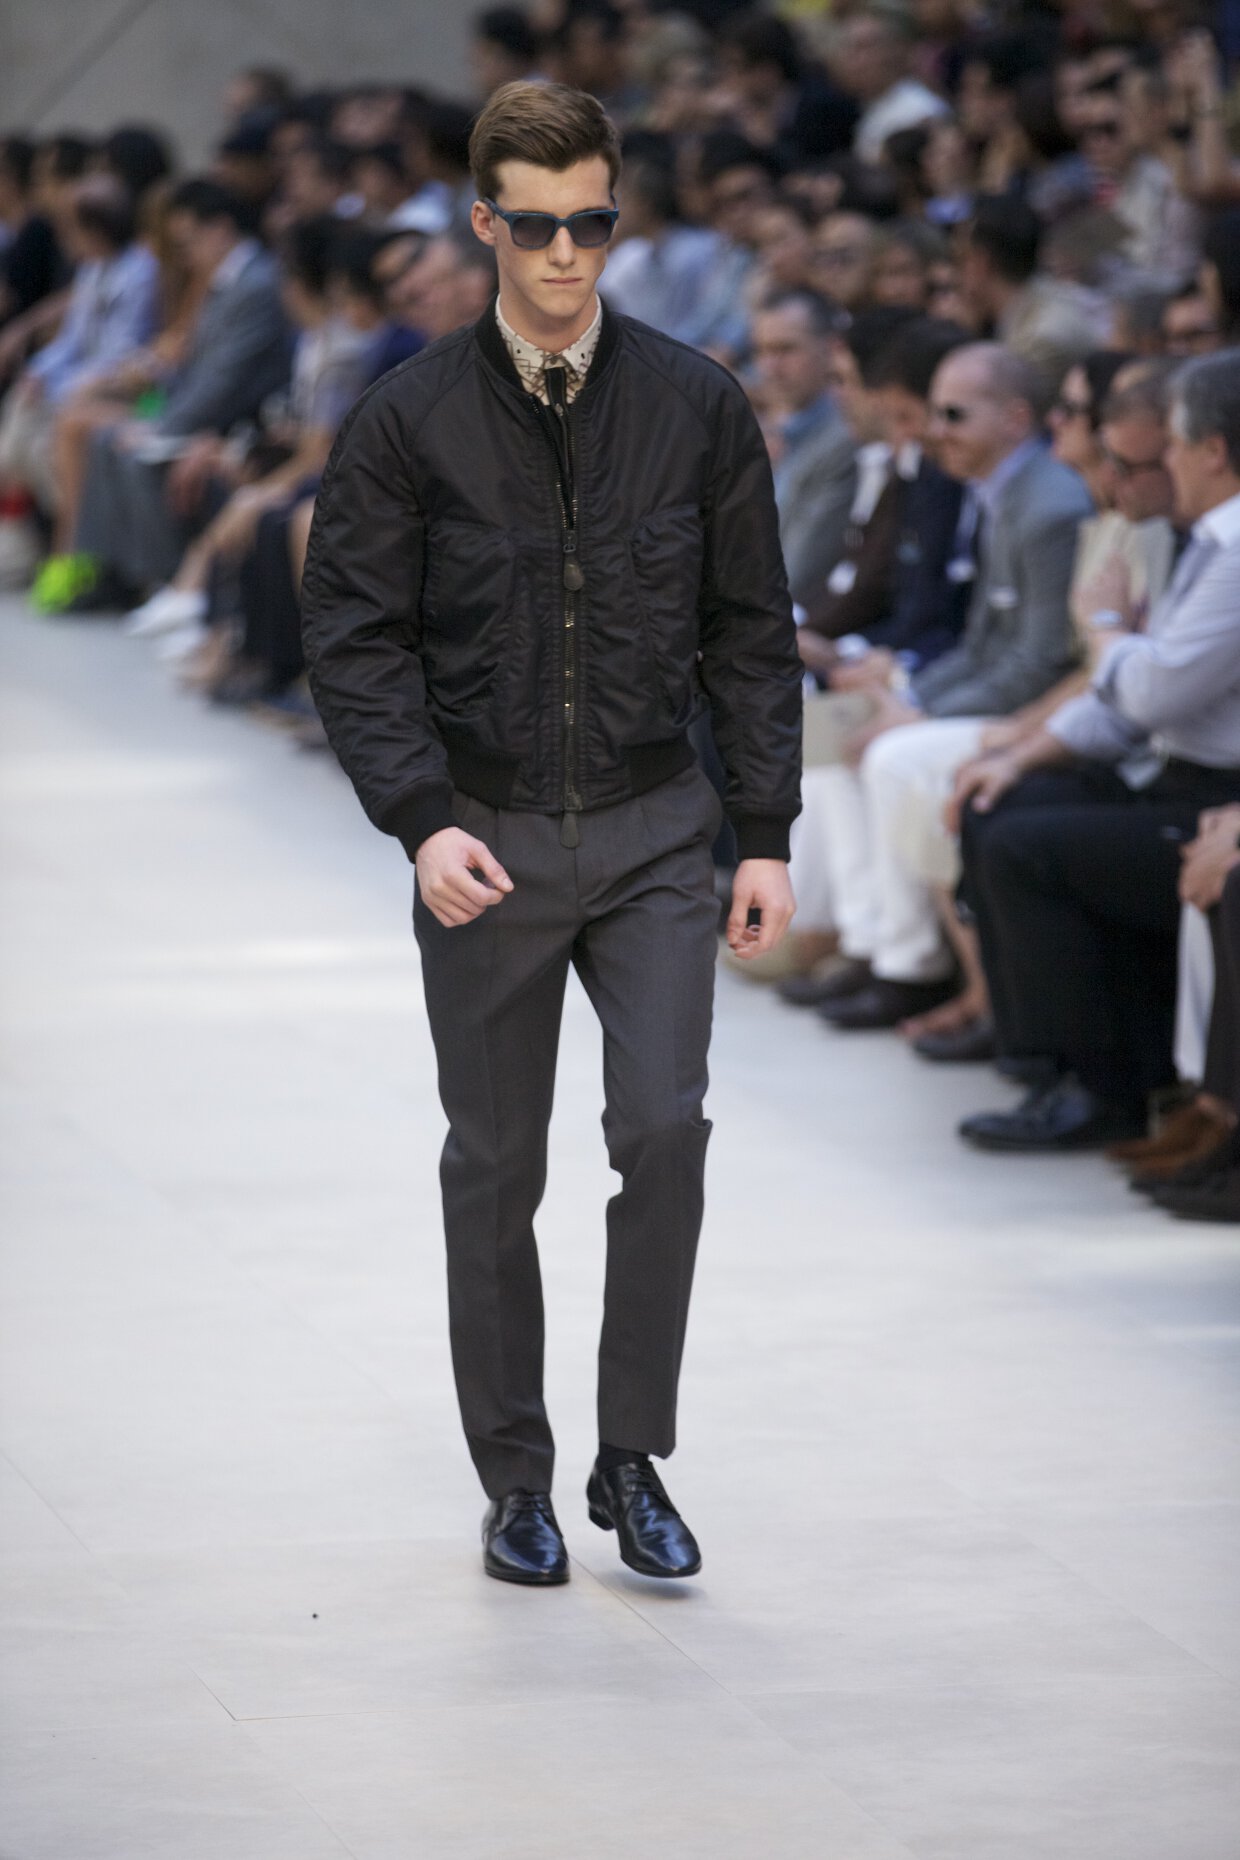 BURBERRY PRORSUM SPRING SUMMER 2013 MEN’S COLLECTION | The Skinny Beep